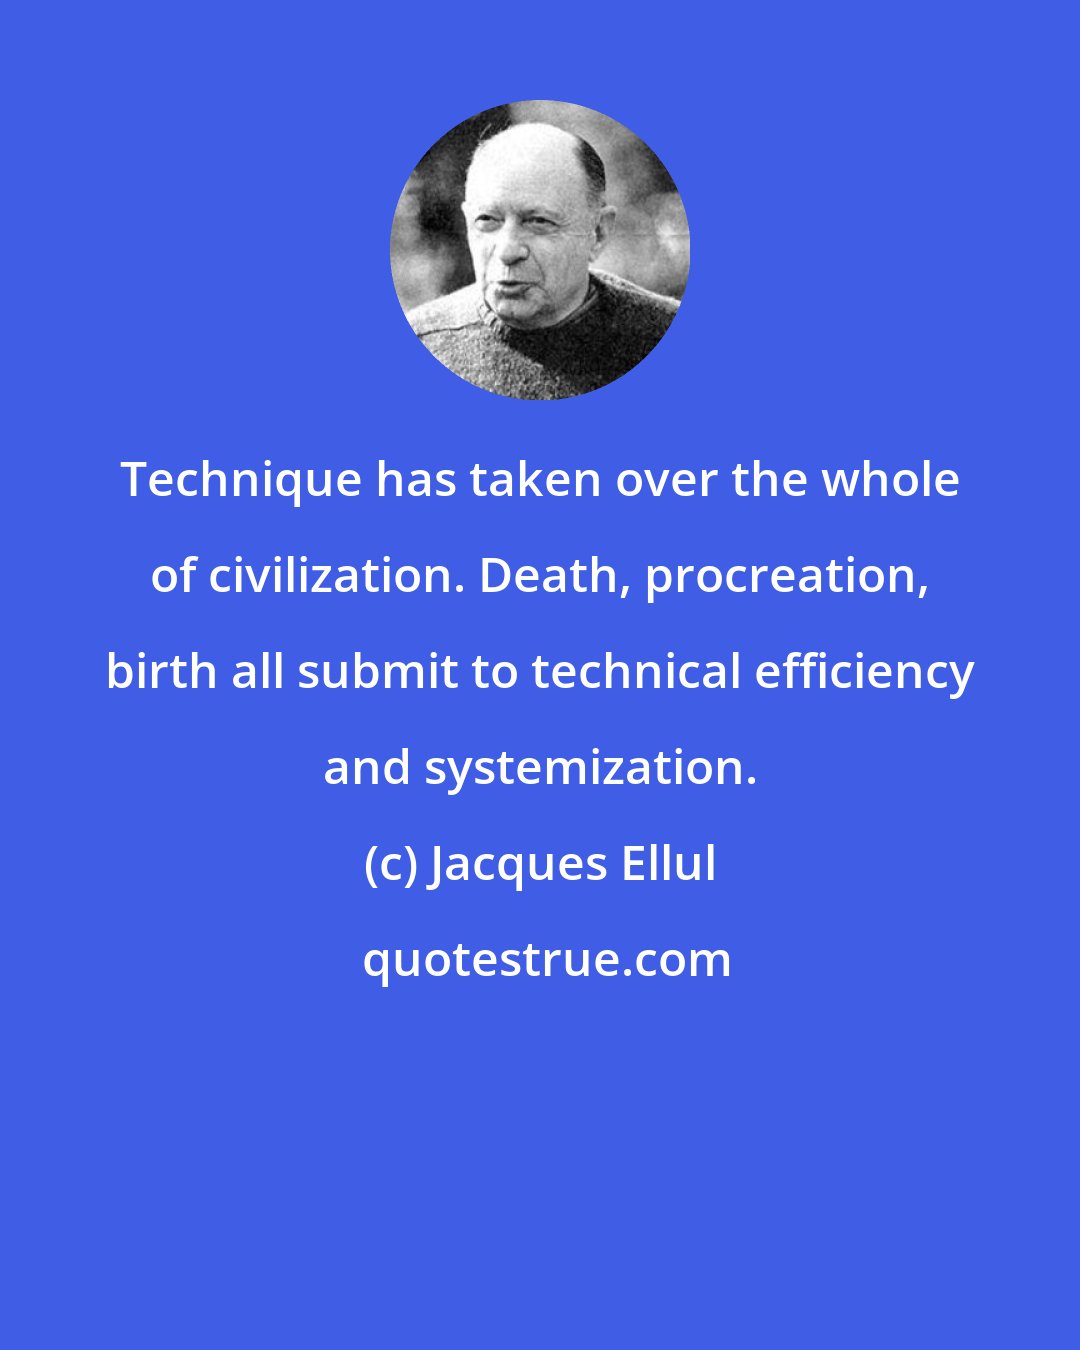 Jacques Ellul: Technique has taken over the whole of civilization. Death, procreation, birth all submit to technical efficiency and systemization.